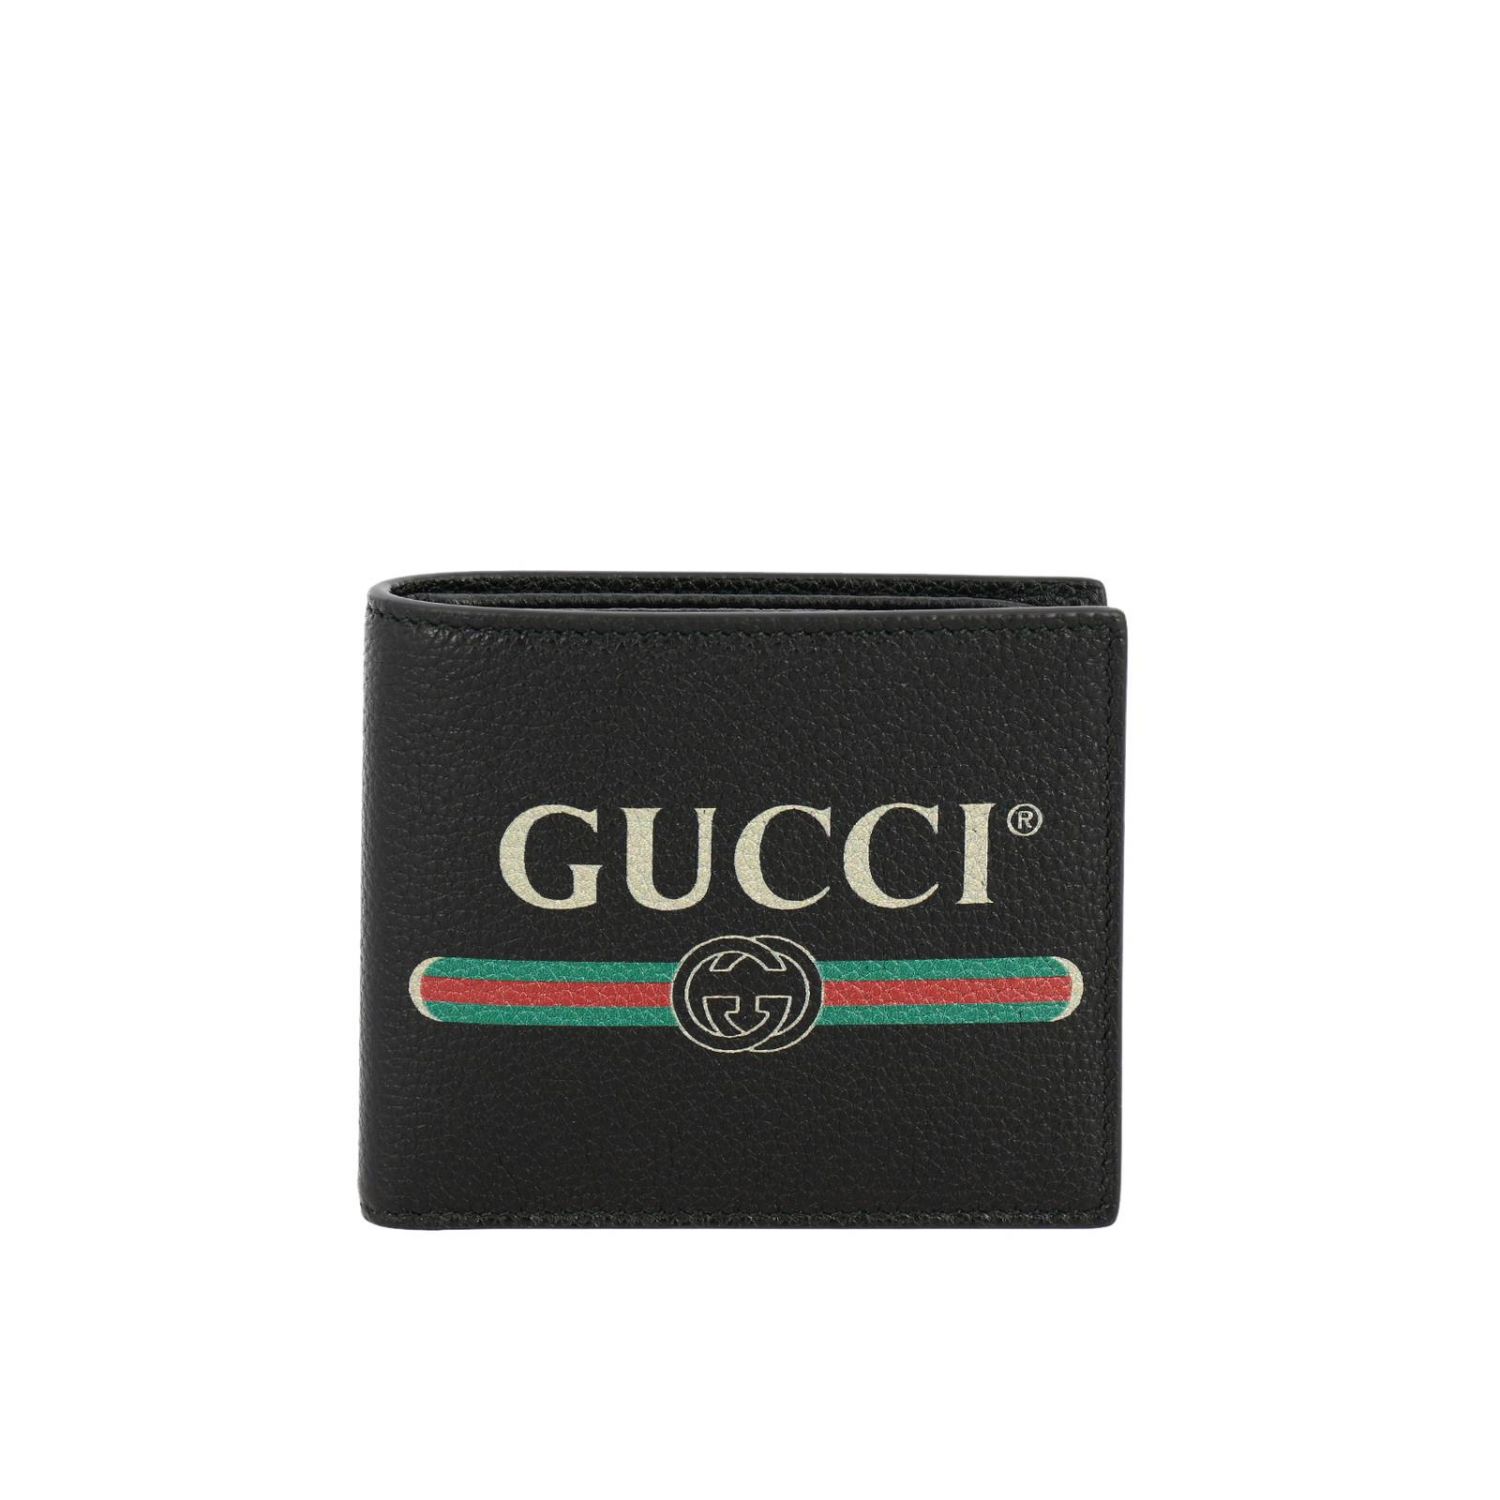 GUCCI: Print horizontal textured leather book wallet with vintage print